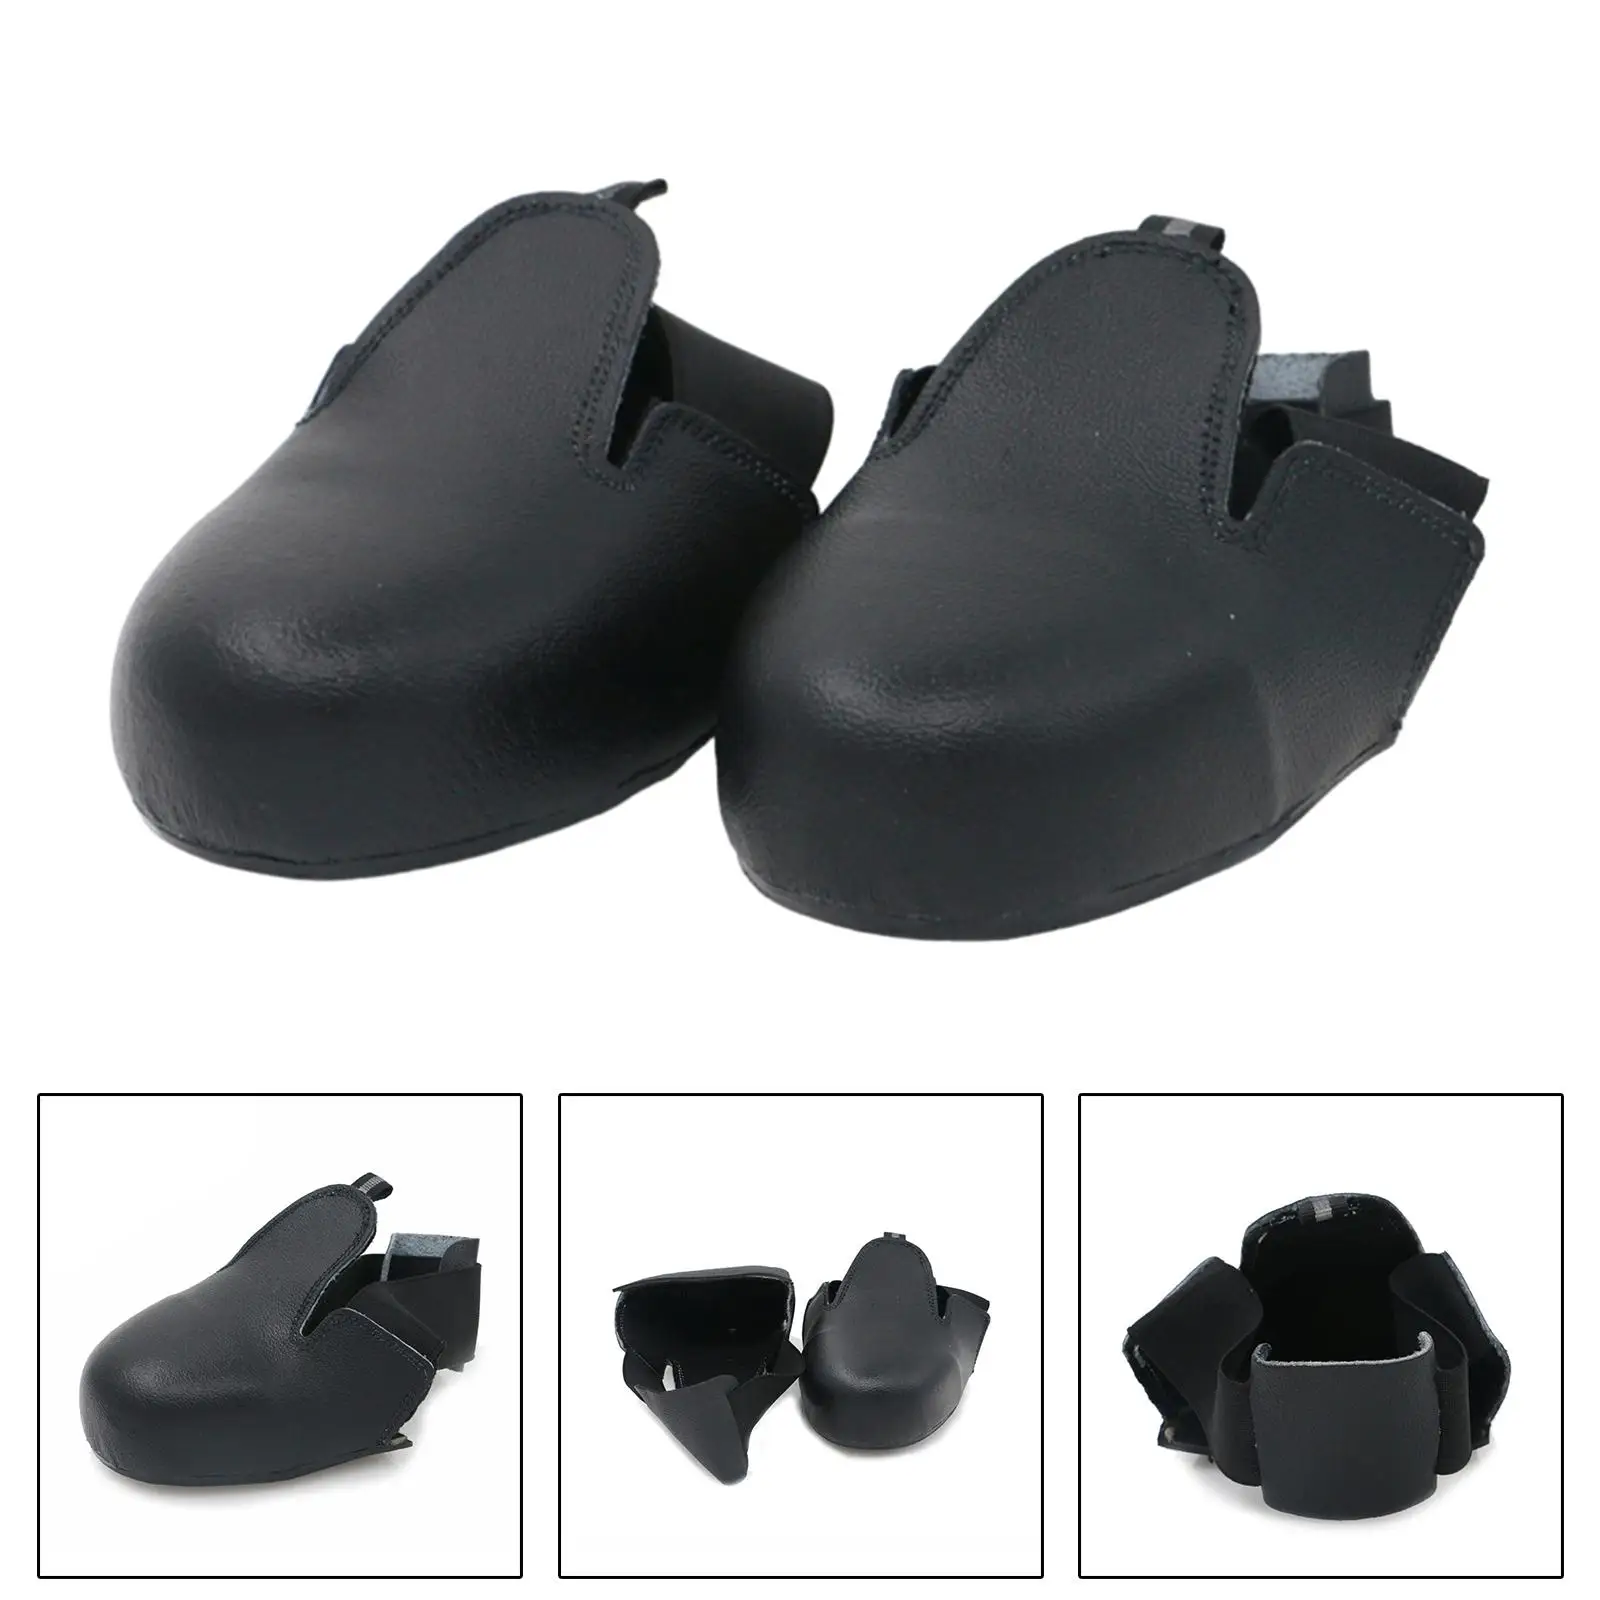 Toe Cap Safety Overshoes Universal Toe Work Shoe Cover Shoe Cap Workplace Anti Smash Cover Anti Smashing PU Leather Shoes Covers